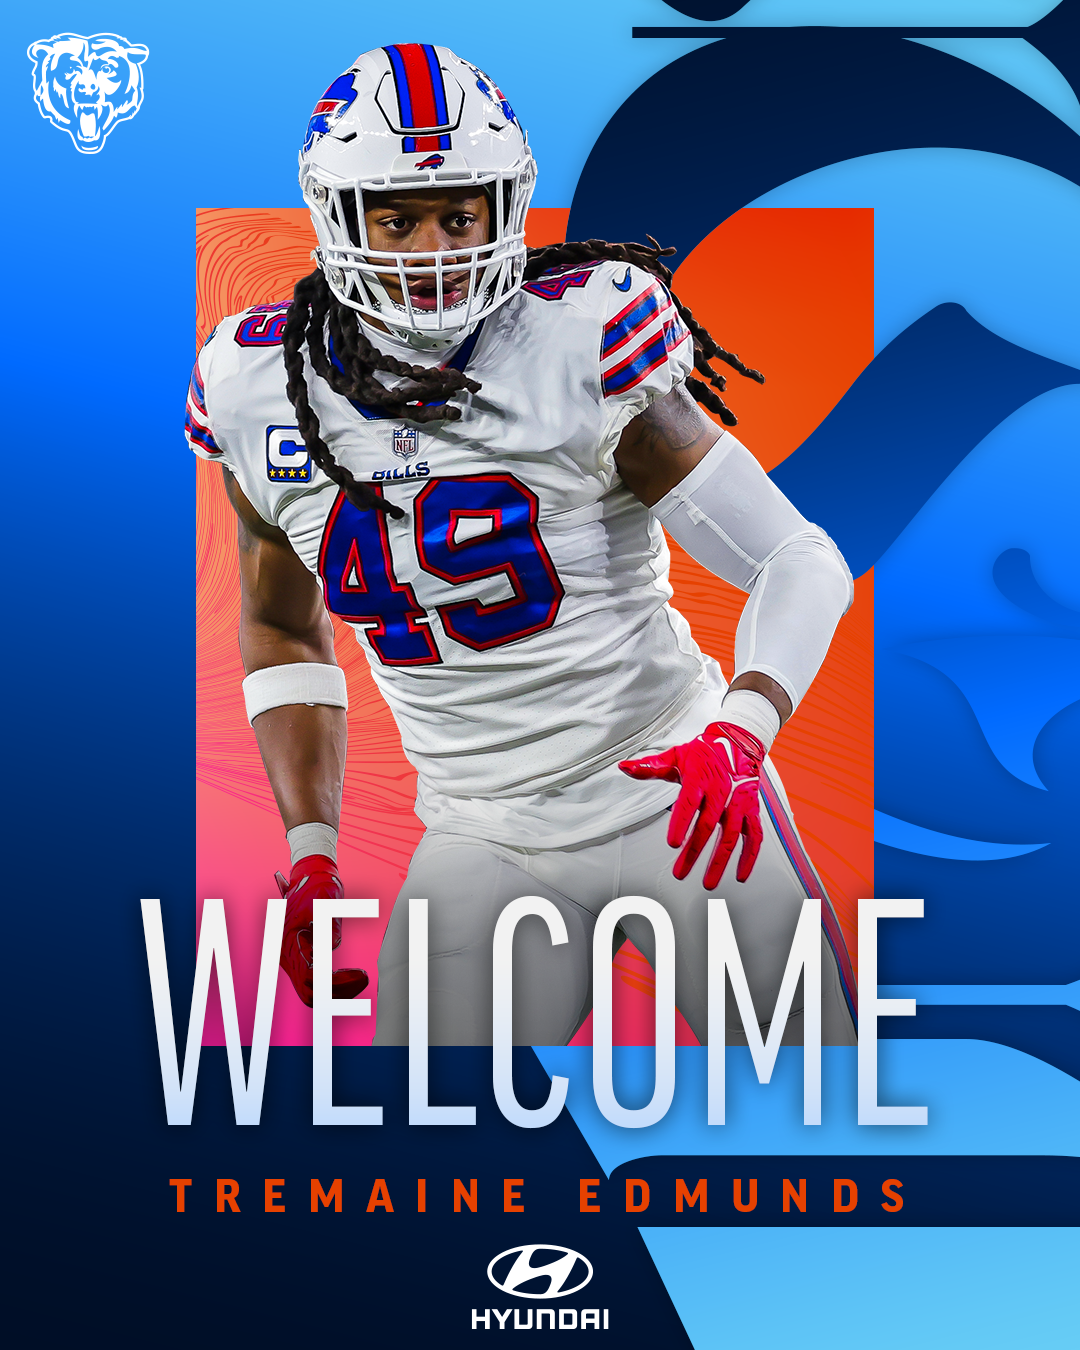 2023-FreeAgency-WELCOME-IG-4x5-1-EDMUNDS.png